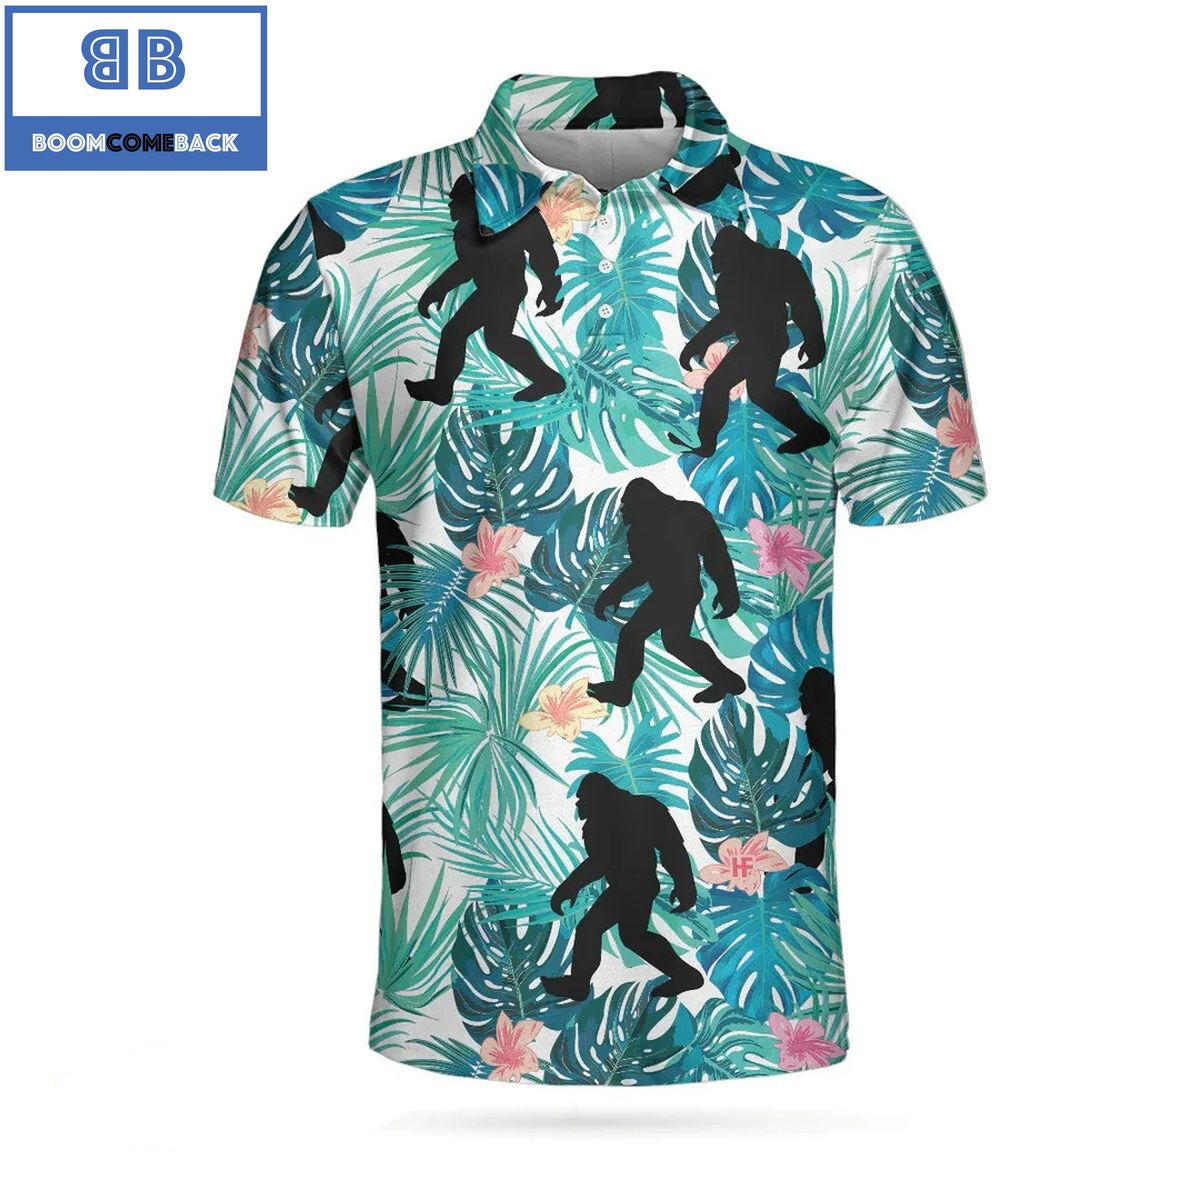 Golf2BTropical2BFloral2BAnd2BLeaves2BAthletic2BCollared2BMens2BPolo2BShirt2B1 MPXNQ